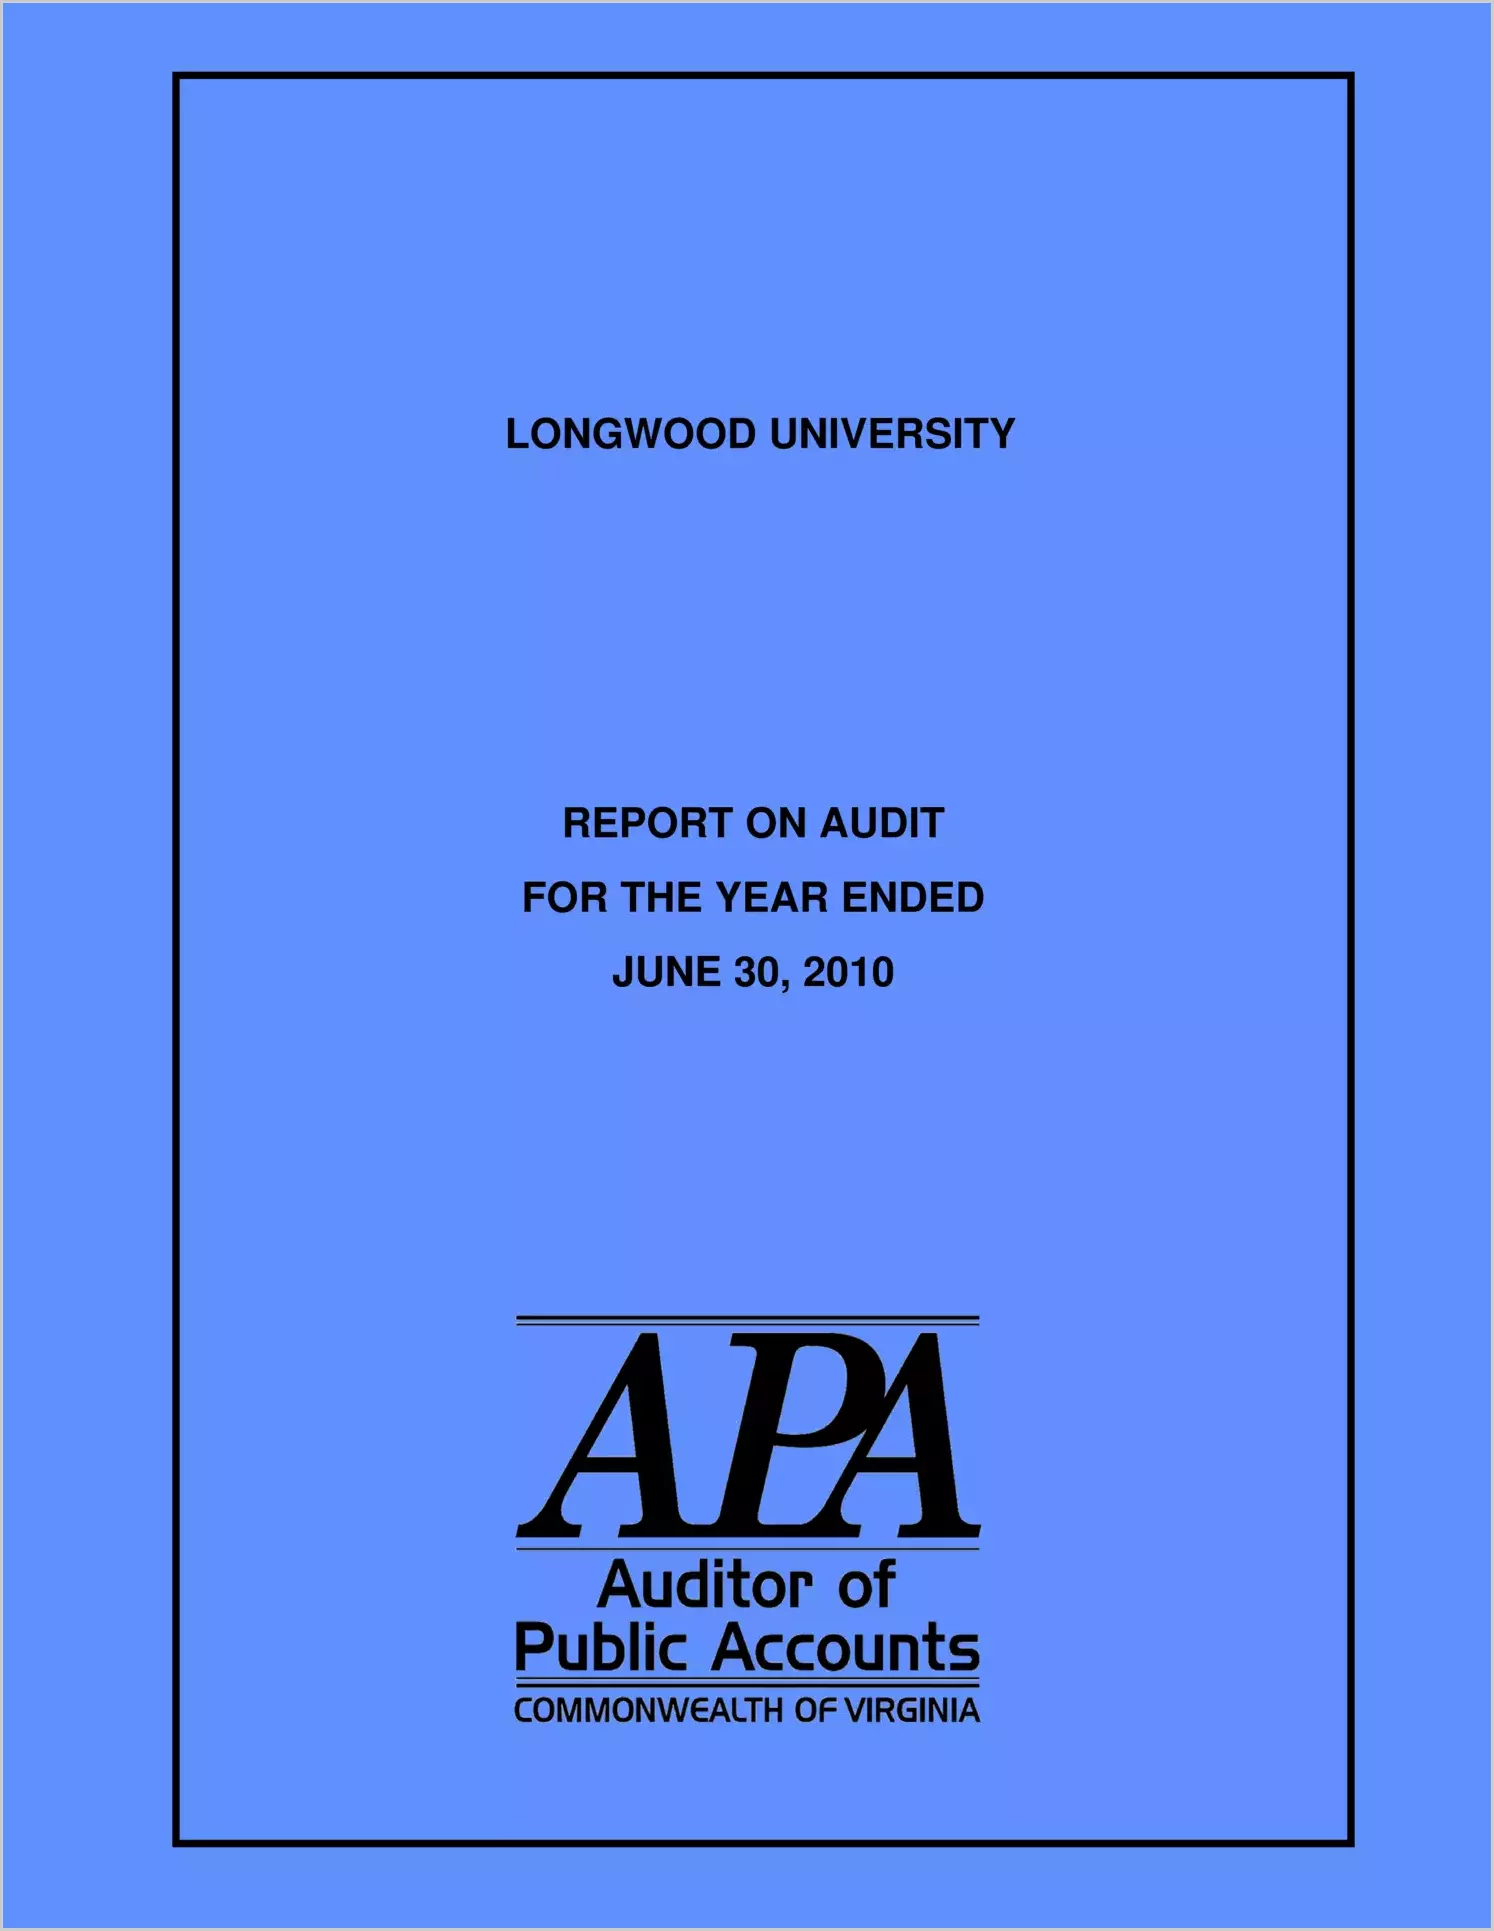 Longwood University report on audit for the year ended June 30, 2010